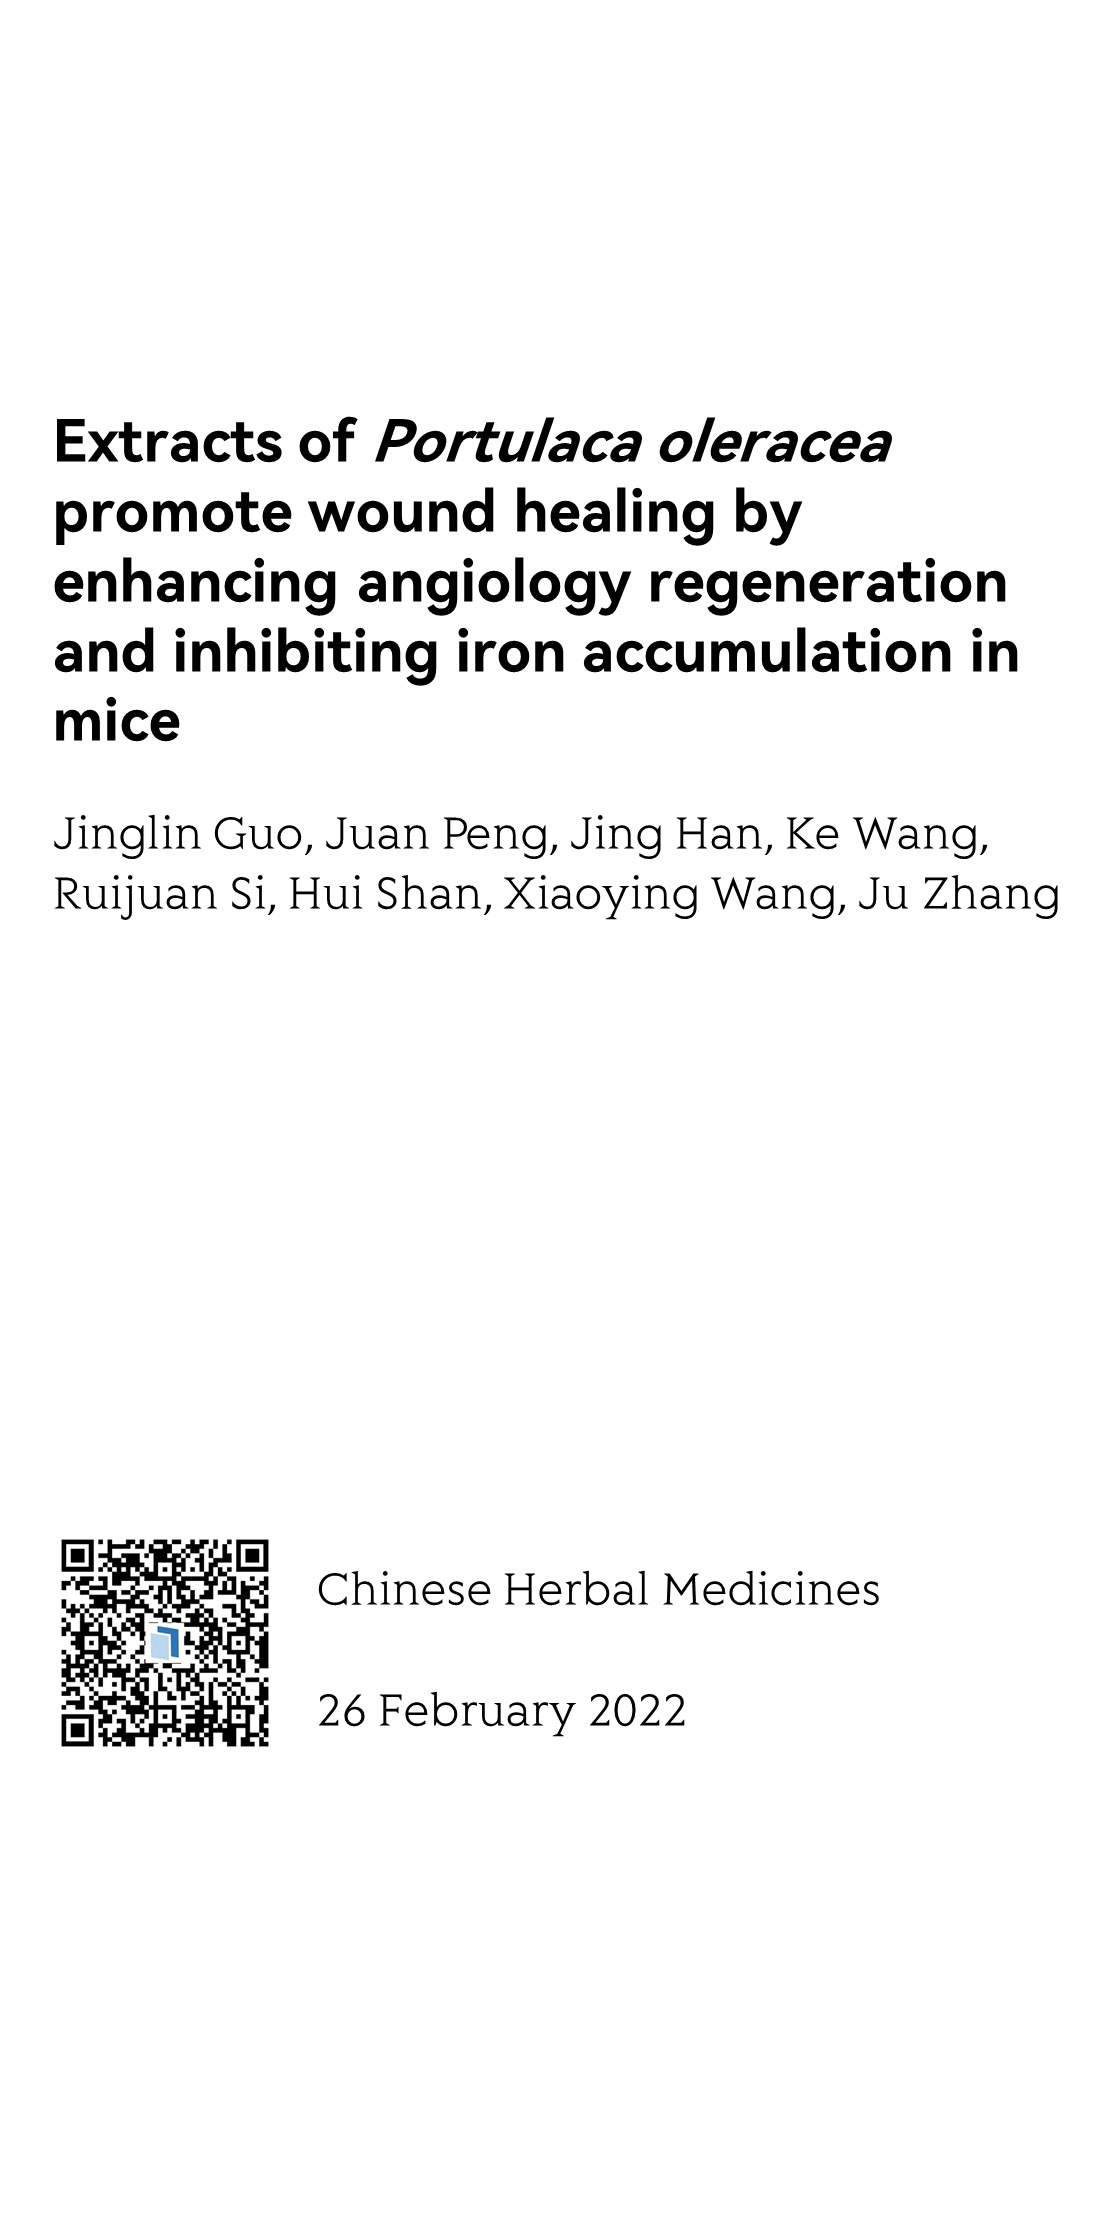 Extracts of Portulaca oleracea promote wound healing by enhancing angiology regeneration and inhibiting iron accumulation in mice_1